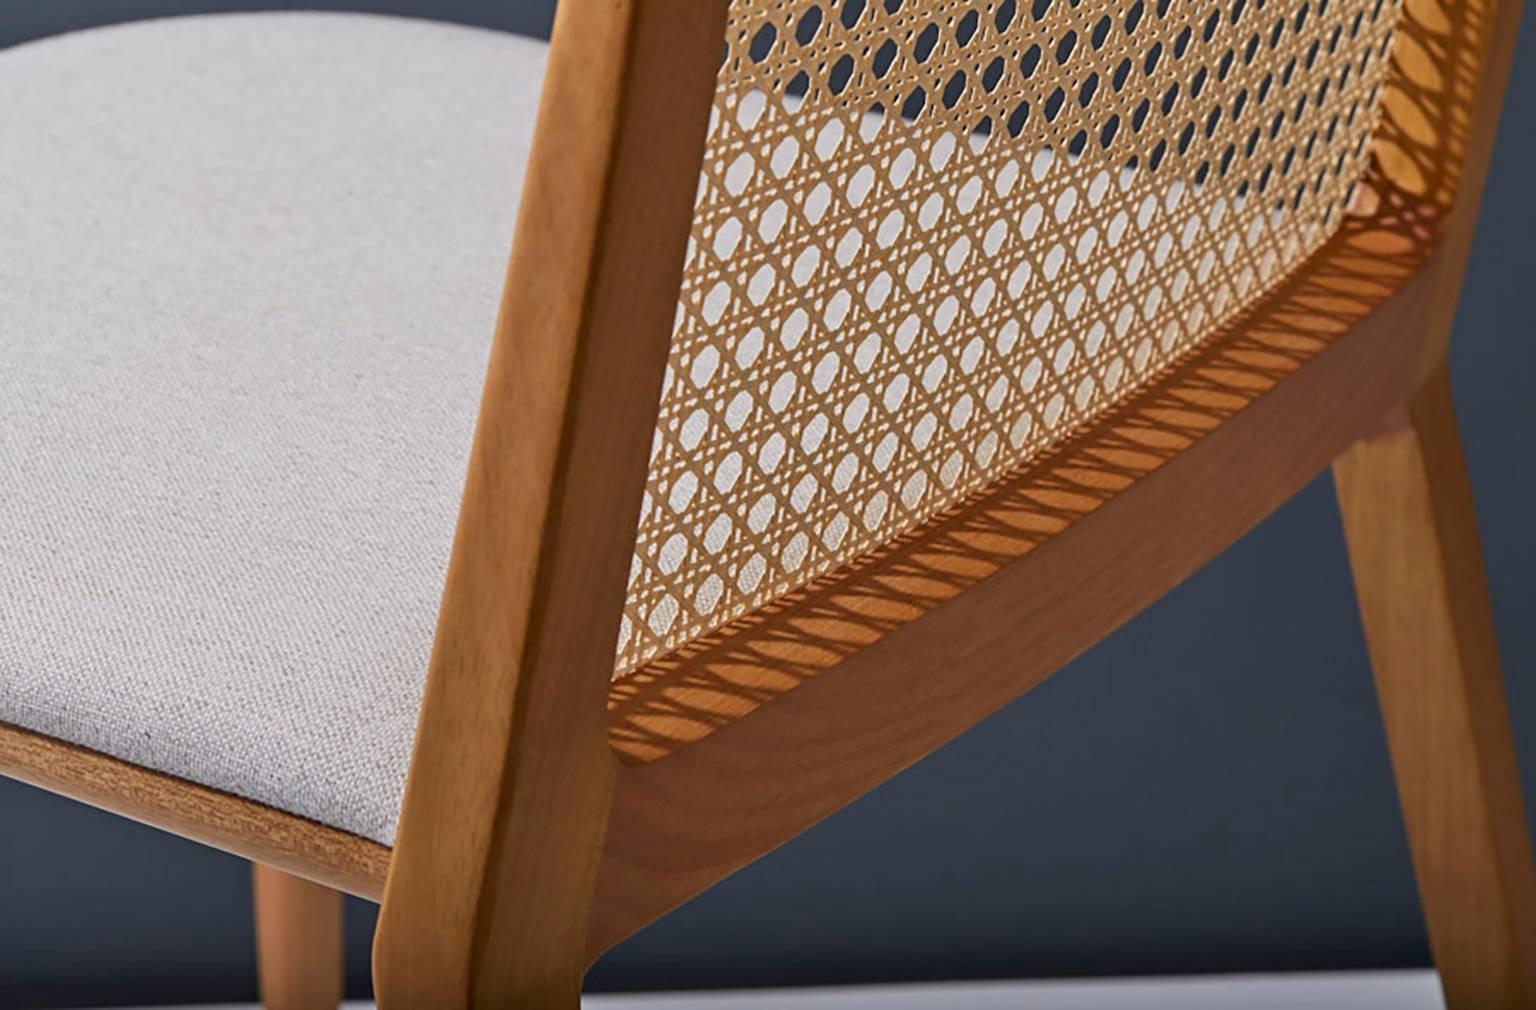 Minimal Style, Solid Wood Chair, Leather or Textile Seating, Caning Backboard For Sale 3